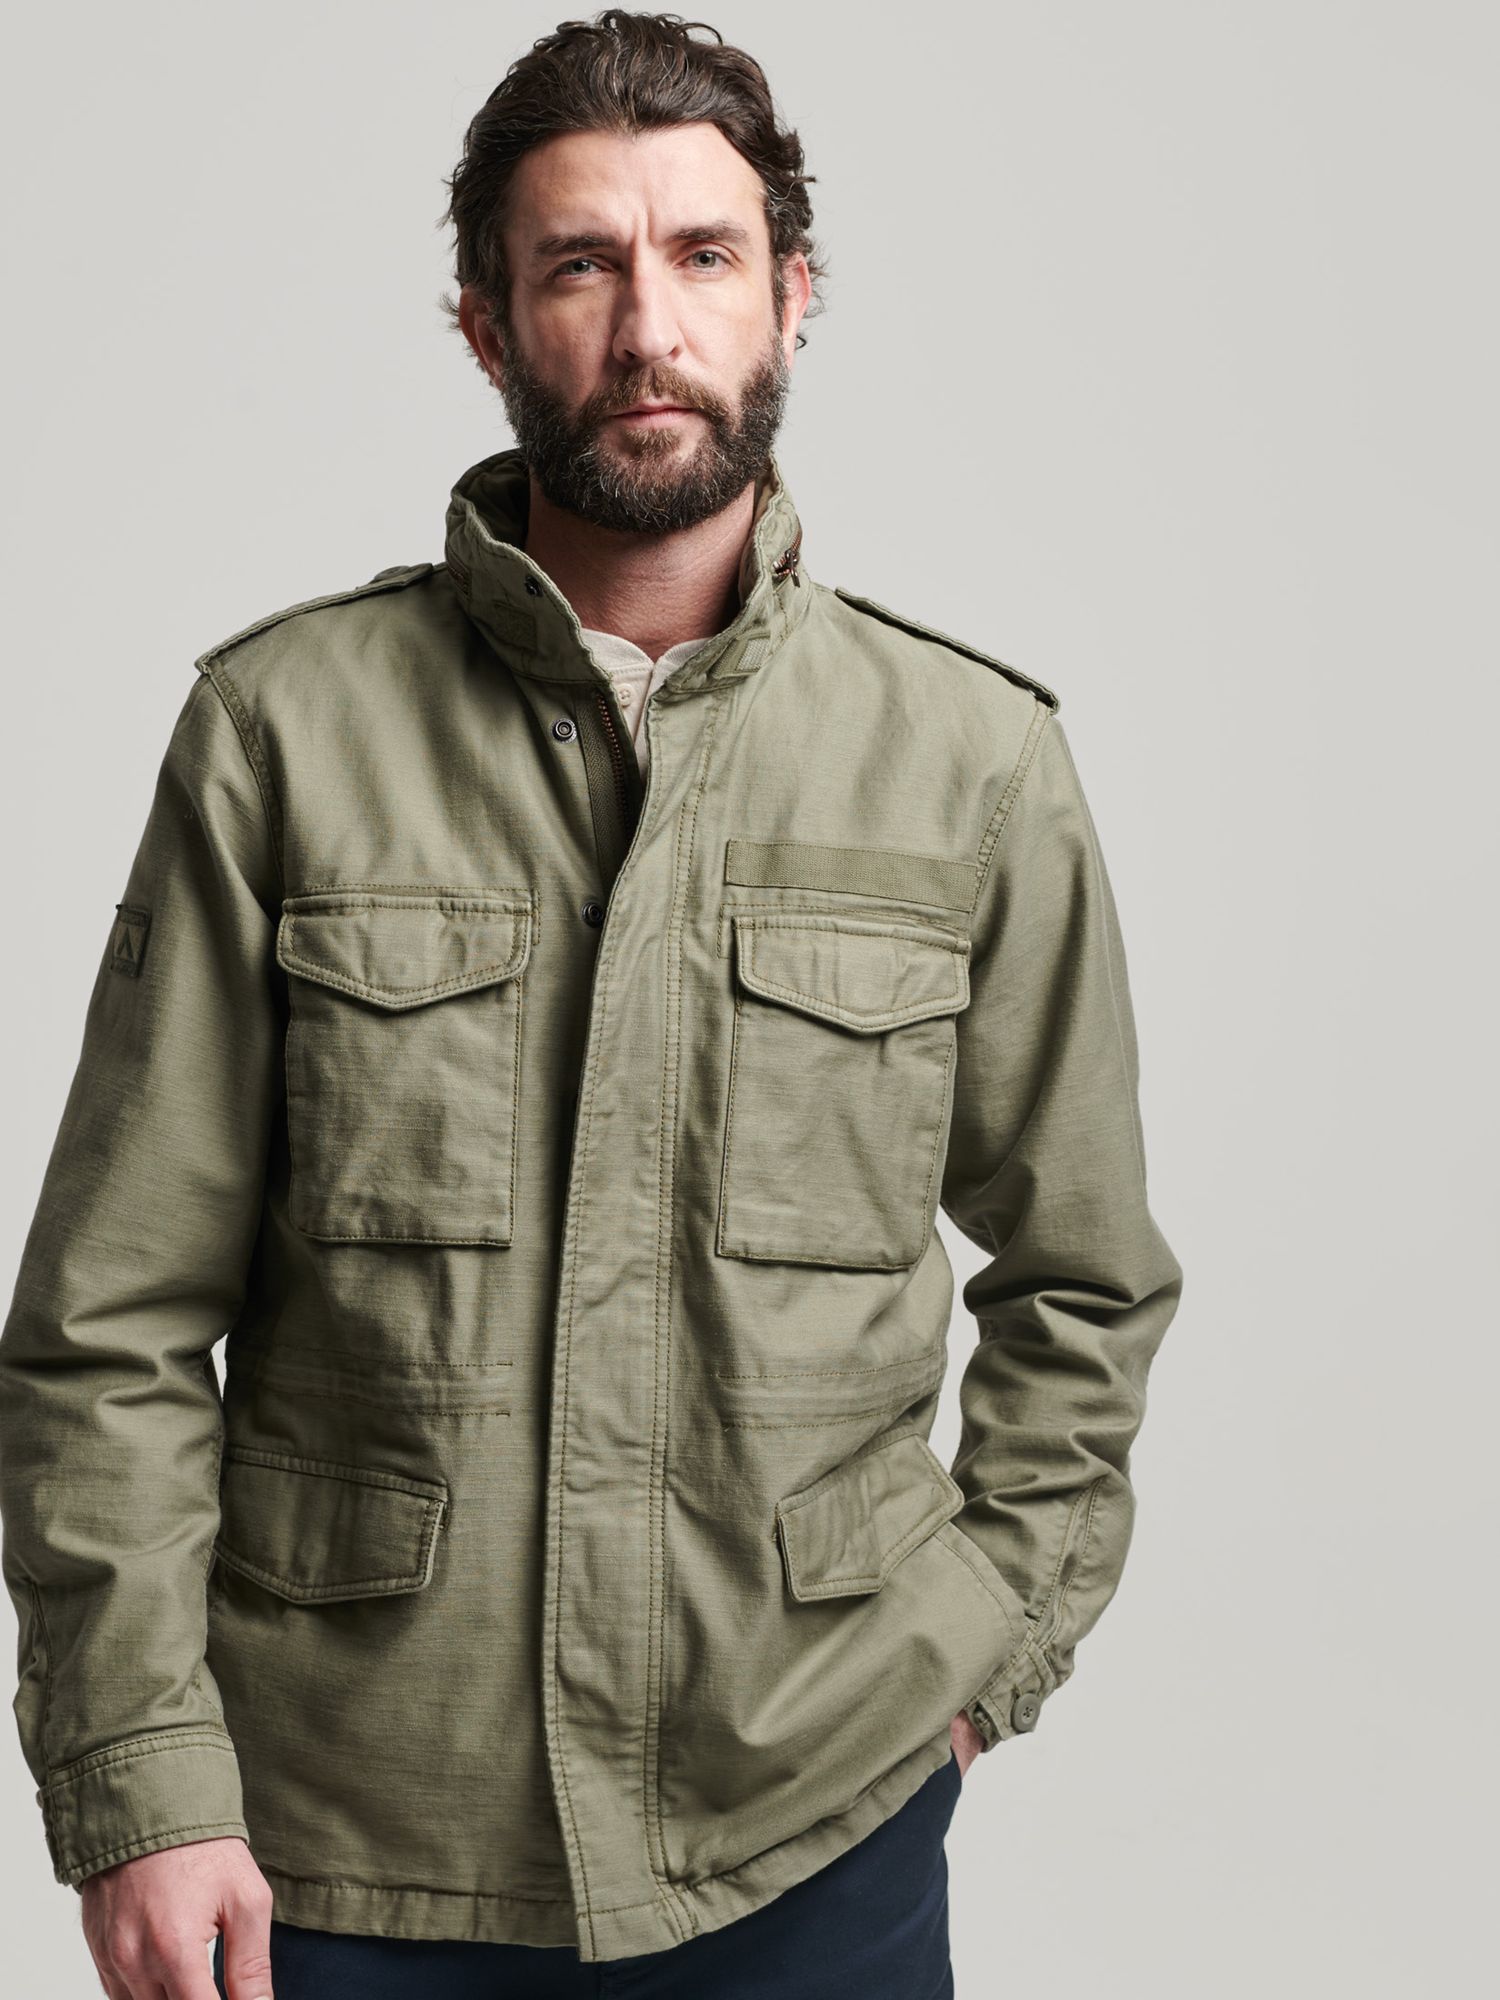 Superdry Military M65 Jacket, Dusty Olive Green at John Lewis & Partners